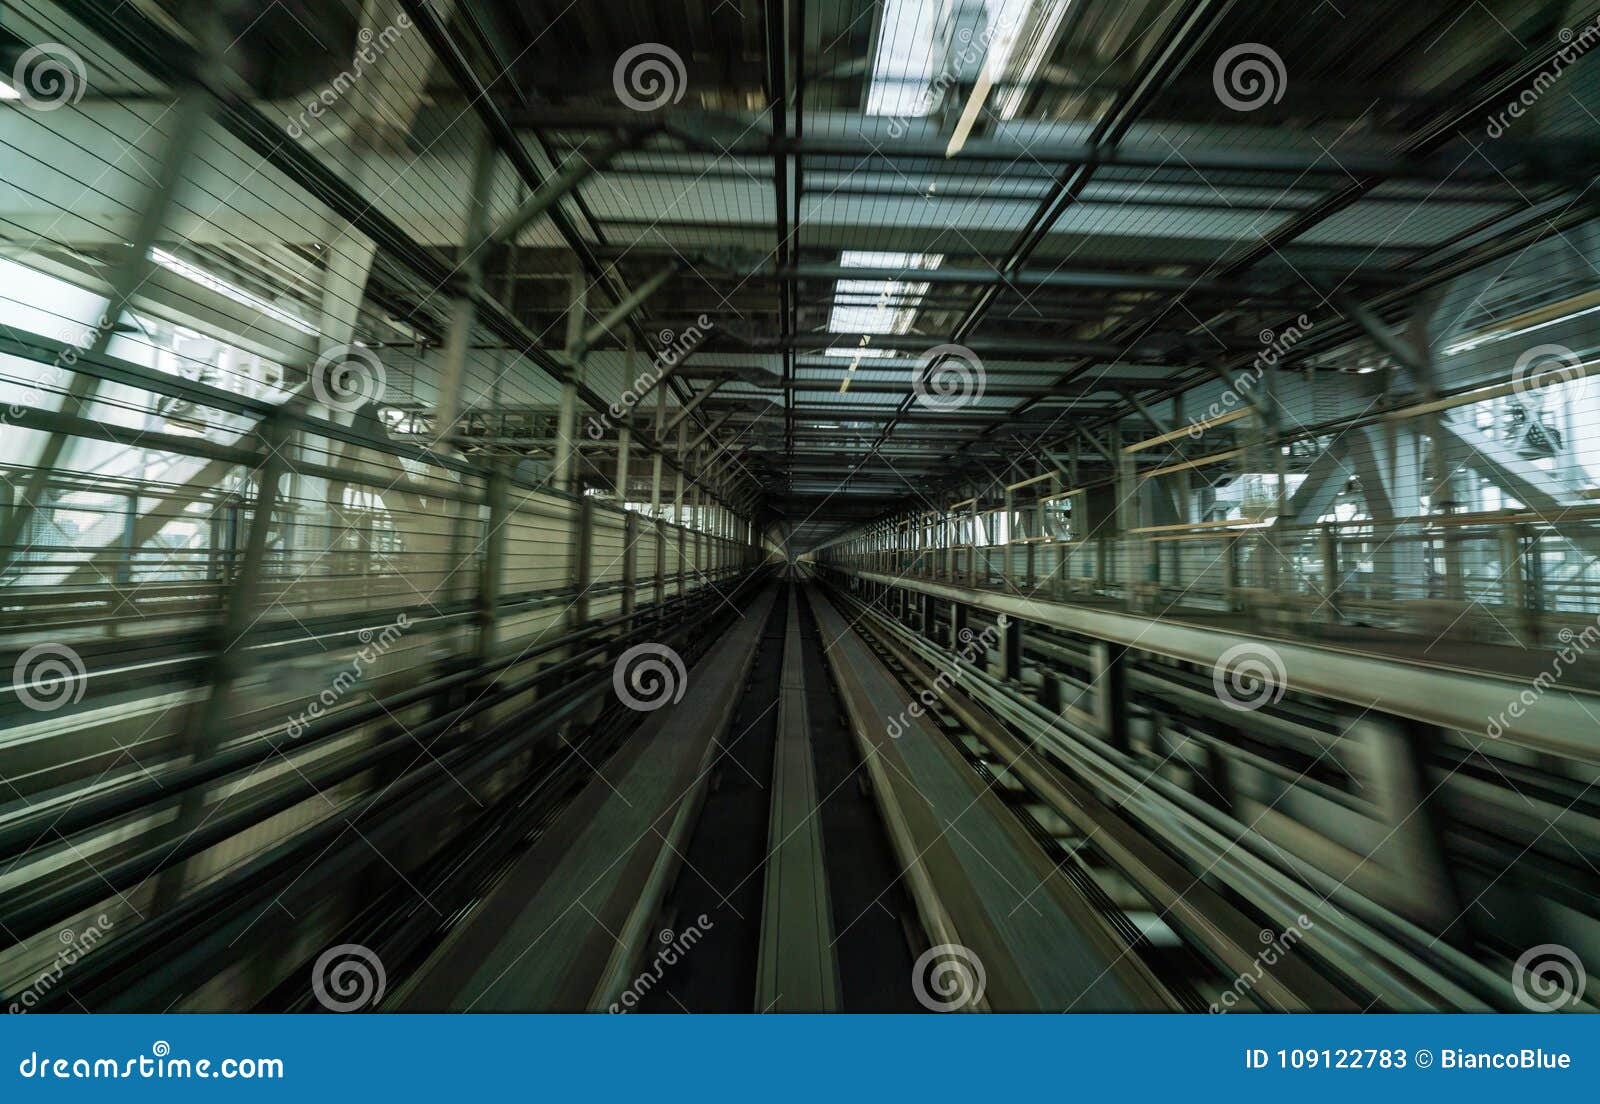 Train Moving on City Rail with Motion Blur Stock Image - Image of curve ...